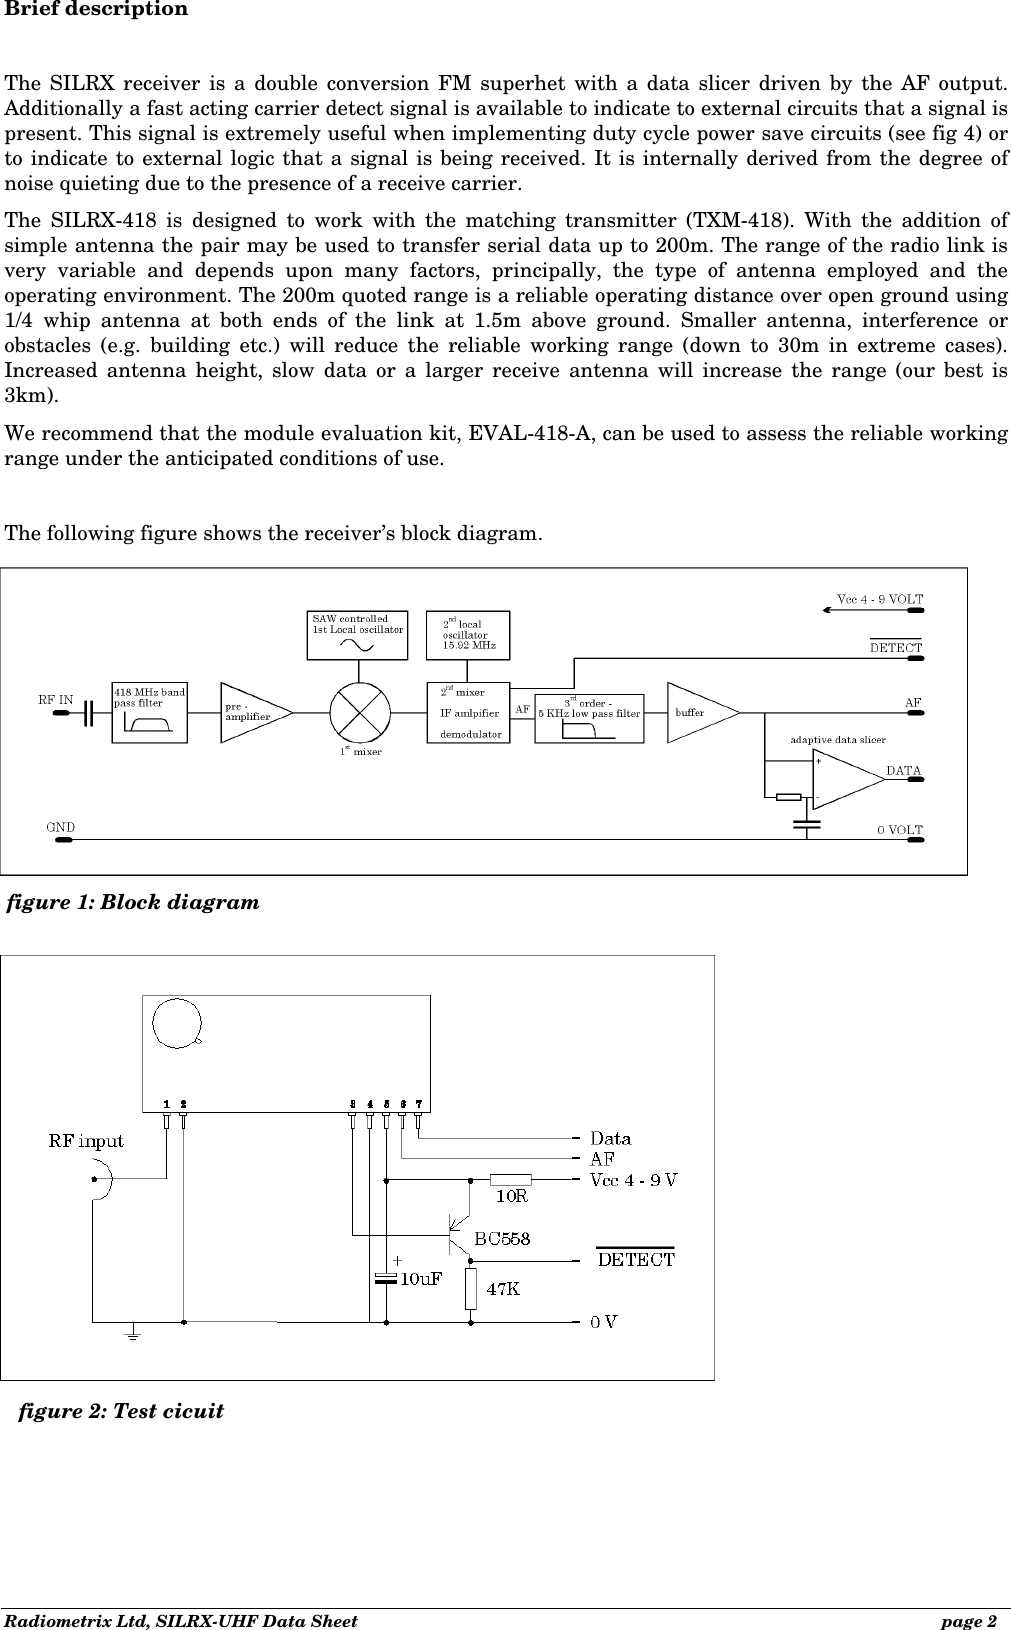 Radiometrix Ltd, SILRX-UHF Data Sheet              page 2 Brief description  The SILRX receiver is a double conversion FM superhet with a data slicer driven by the AF output. Additionally a fast acting carrier detect signal is available to indicate to external circuits that a signal is present. This signal is extremely useful when implementing duty cycle power save circuits (see fig 4) or to indicate to external logic that a signal is being received. It is internally derived from the degree of noise quieting due to the presence of a receive carrier. The SILRX-418 is designed to work with the matching transmitter (TXM-418). With the addition of simple antenna the pair may be used to transfer serial data up to 200m. The range of the radio link is very variable and depends upon many factors, principally, the type of antenna employed and the operating environment. The 200m quoted range is a reliable operating distance over open ground using 1/4 whip antenna at both ends of the link at 1.5m above ground. Smaller antenna, interference or obstacles (e.g. building etc.) will reduce the reliable working range (down to 30m in extreme cases). Increased antenna height, slow data or a larger receive antenna will increase the range (our best is 3km). We recommend that the module evaluation kit, EVAL-418-A, can be used to assess the reliable working range under the anticipated conditions of use.  The following figure shows the receiver’s block diagram.figure 1: Block diagram figure 2: Test cicuit 